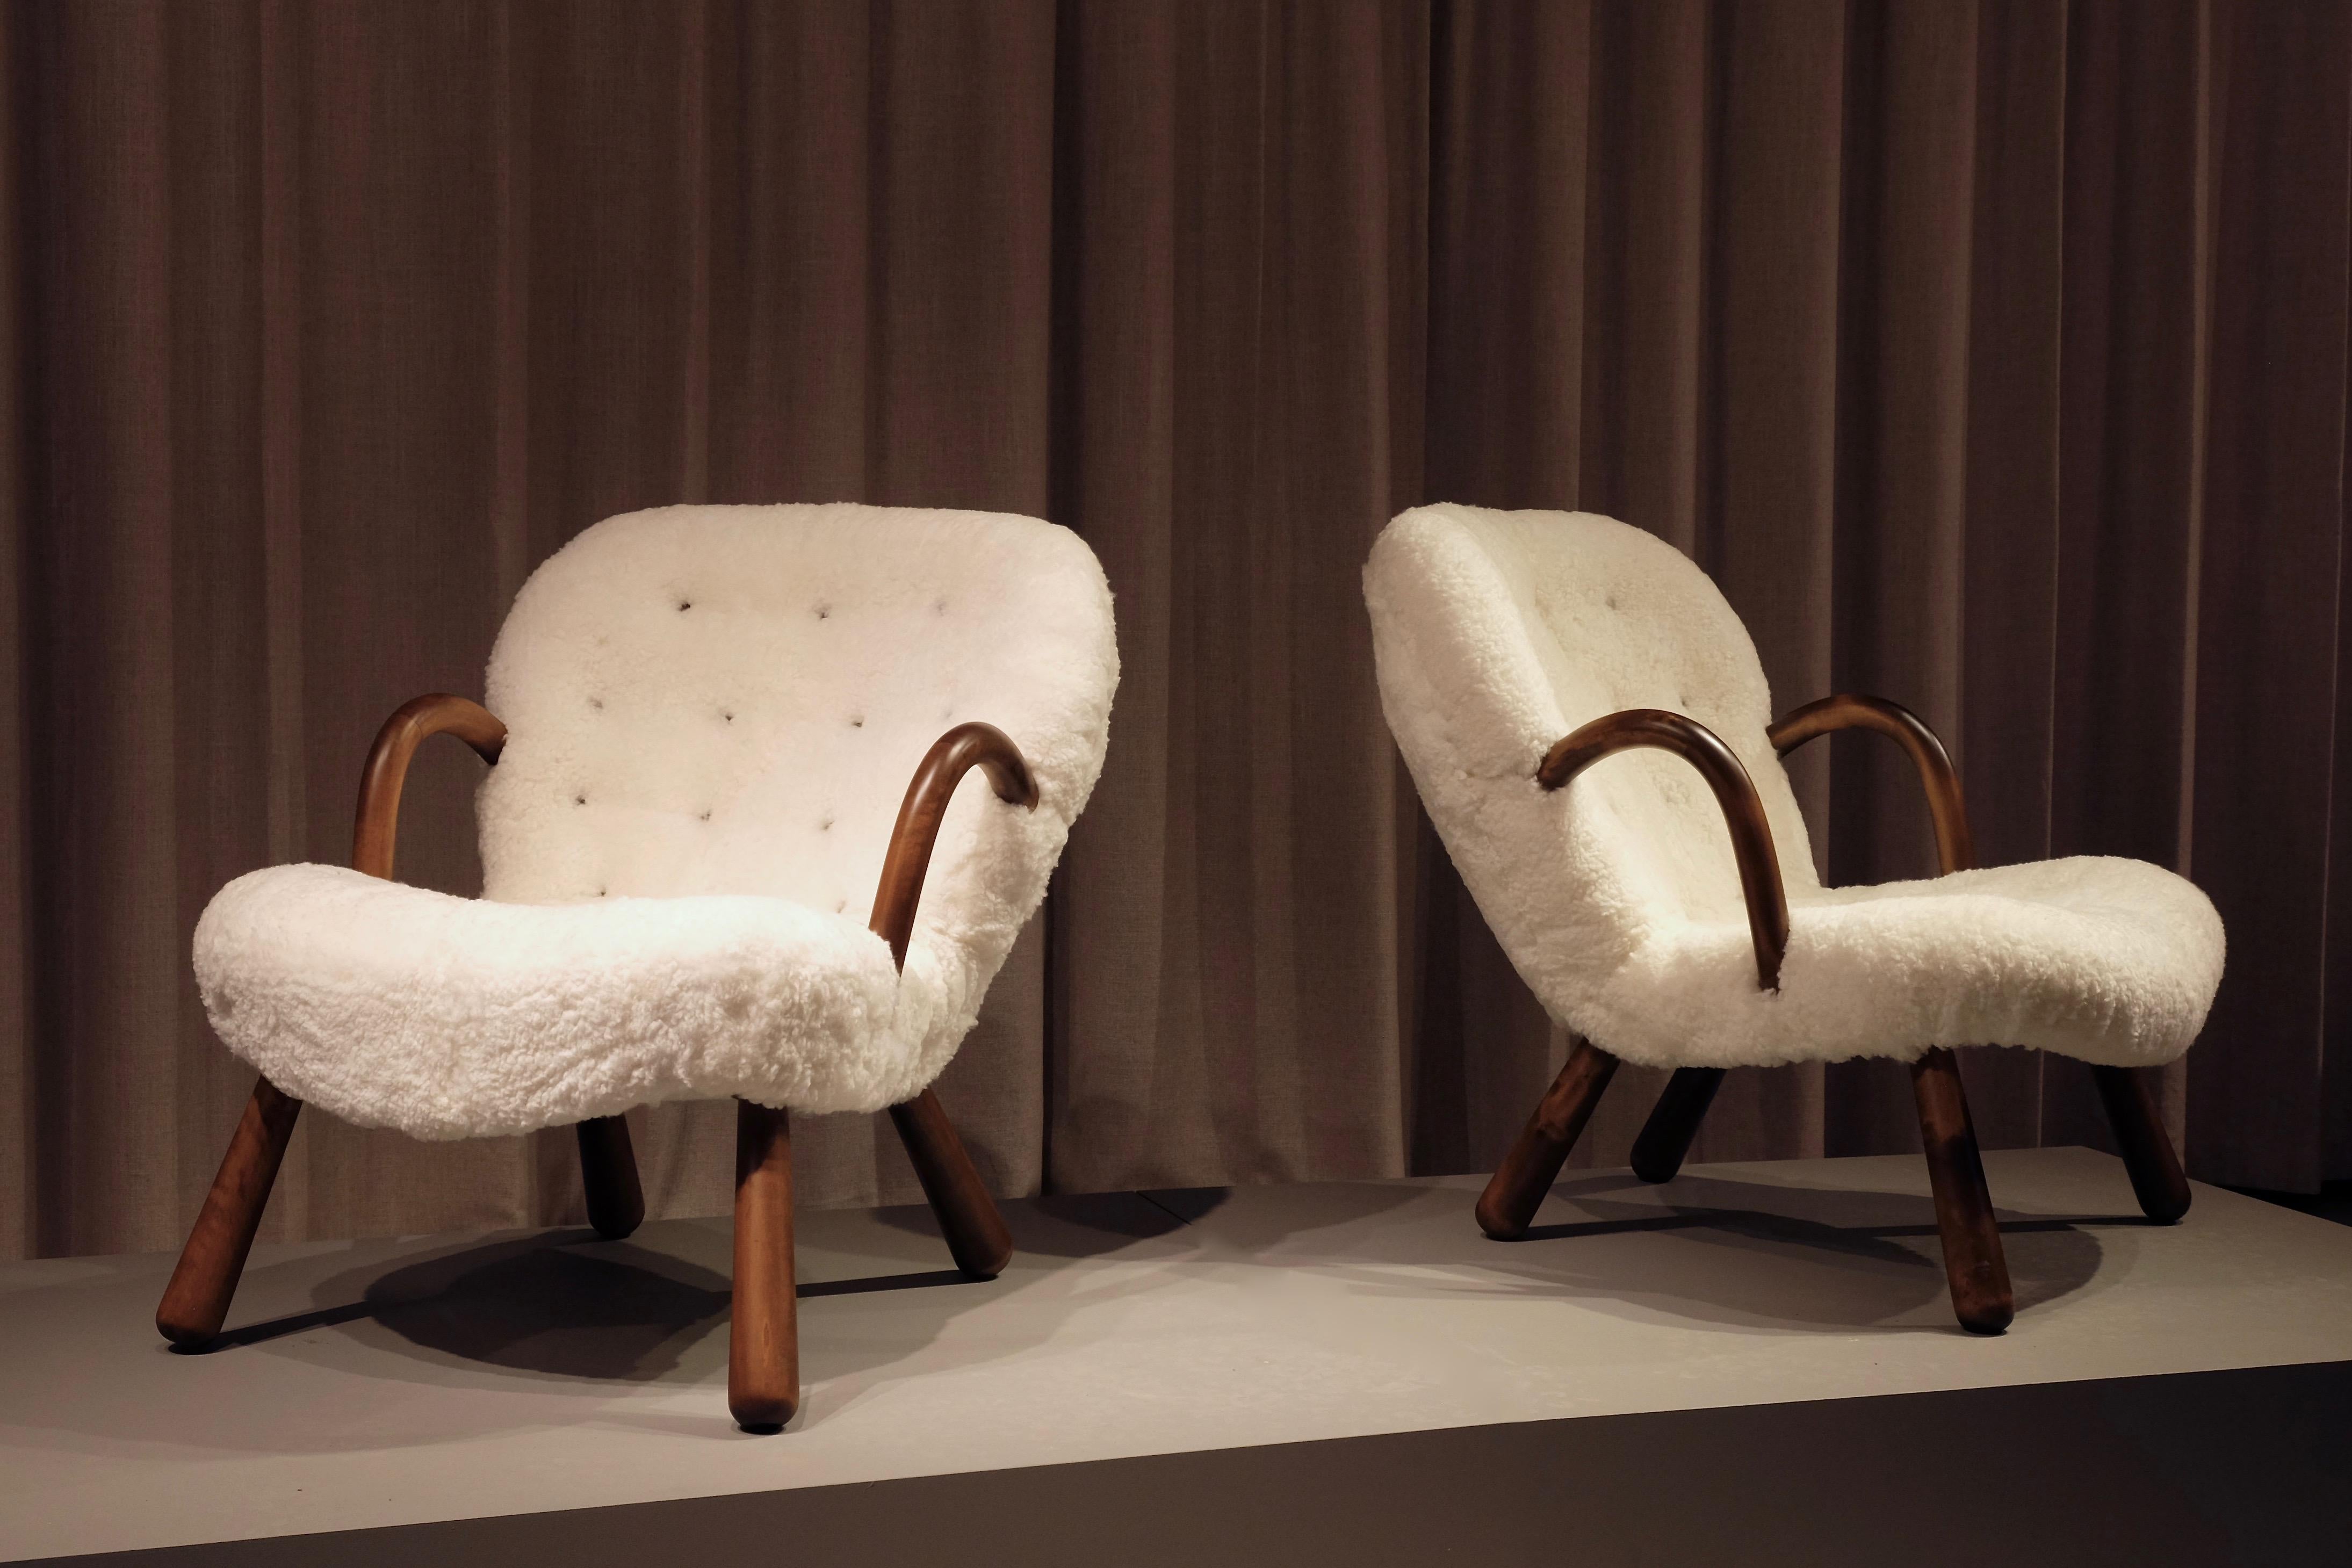 Sheepskin Philip Arctander Clam Chairs by Nordisk Stål & Møbel Central in Denmark, 1940s